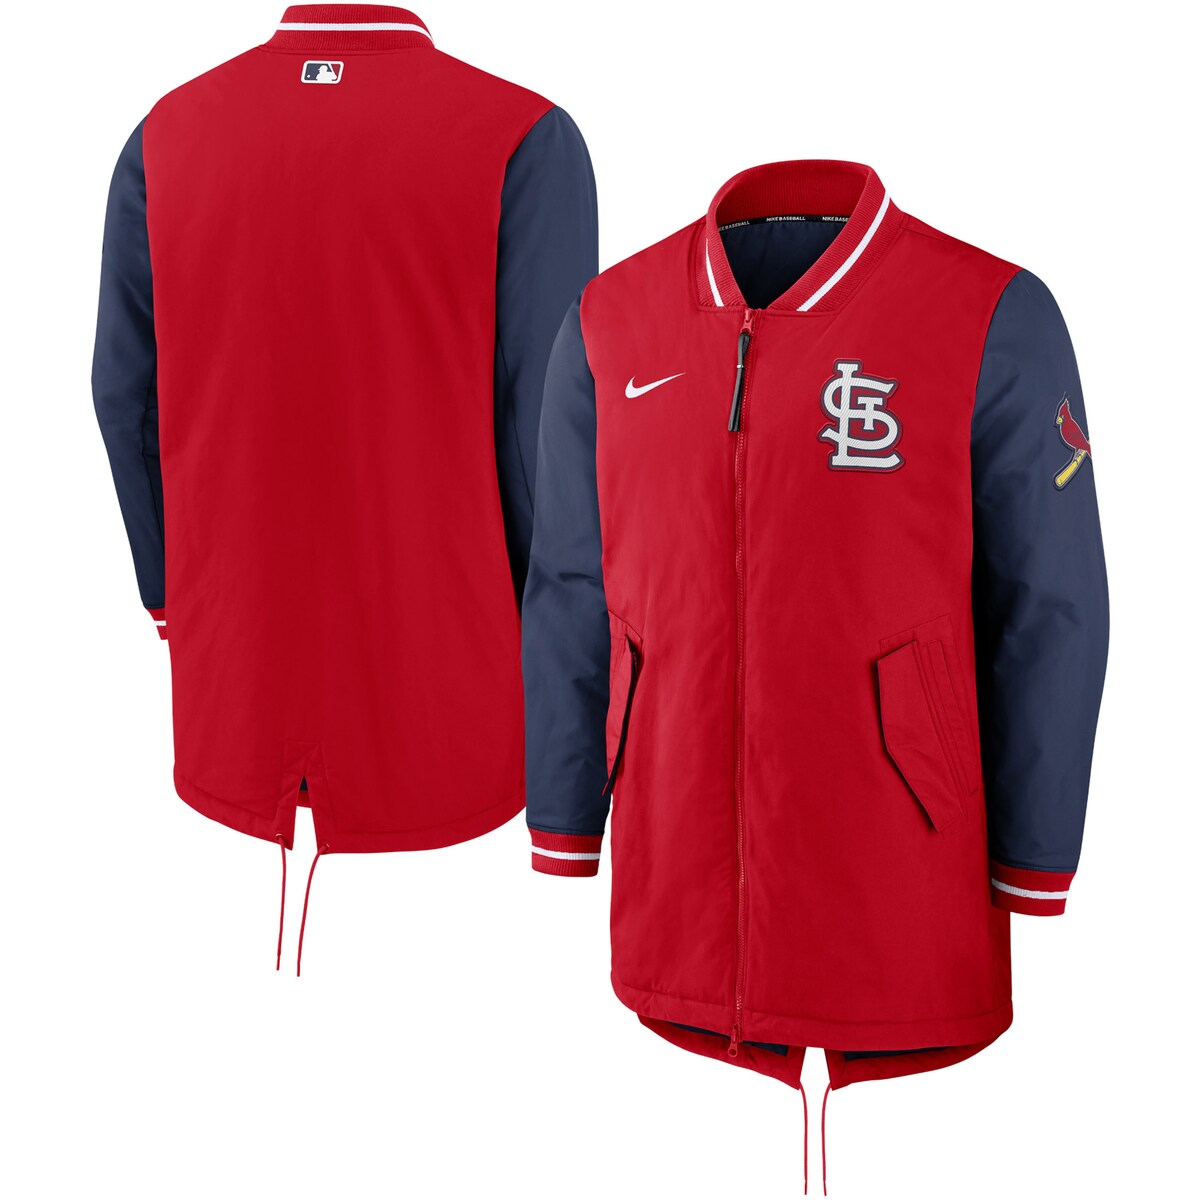 Gear up like the top St. Louis Cardinals players with this Nike Dugout jacket. Loads of pockets allow you to tuck small essentials away, and the standup collar offers extra coverage. With a heavyweight design, this full-zip features a quilted lining for added warmth and integrated Nike Repel technology to ward off rain or moisture. The striking St. Louis Cardinals graphics make this jacket a must-have for any fan facing chilly temperatures.Nike Repel technology sheds light moisture to help keep you dry throughout the dayRib-knit collar and cuffsFull-zipTwo side slip pocketsMachine wash, tumble dry lowMaterial: 100% PolyesterEmbroidered fabric appliquesBrand: NikeHeavyweight jacket suitable for cold temperaturesTwo front pockets with magnetic closureQuilted lining with synthetic fillOfficially licensedAdjustable drawstring at hemImportedFull Zip